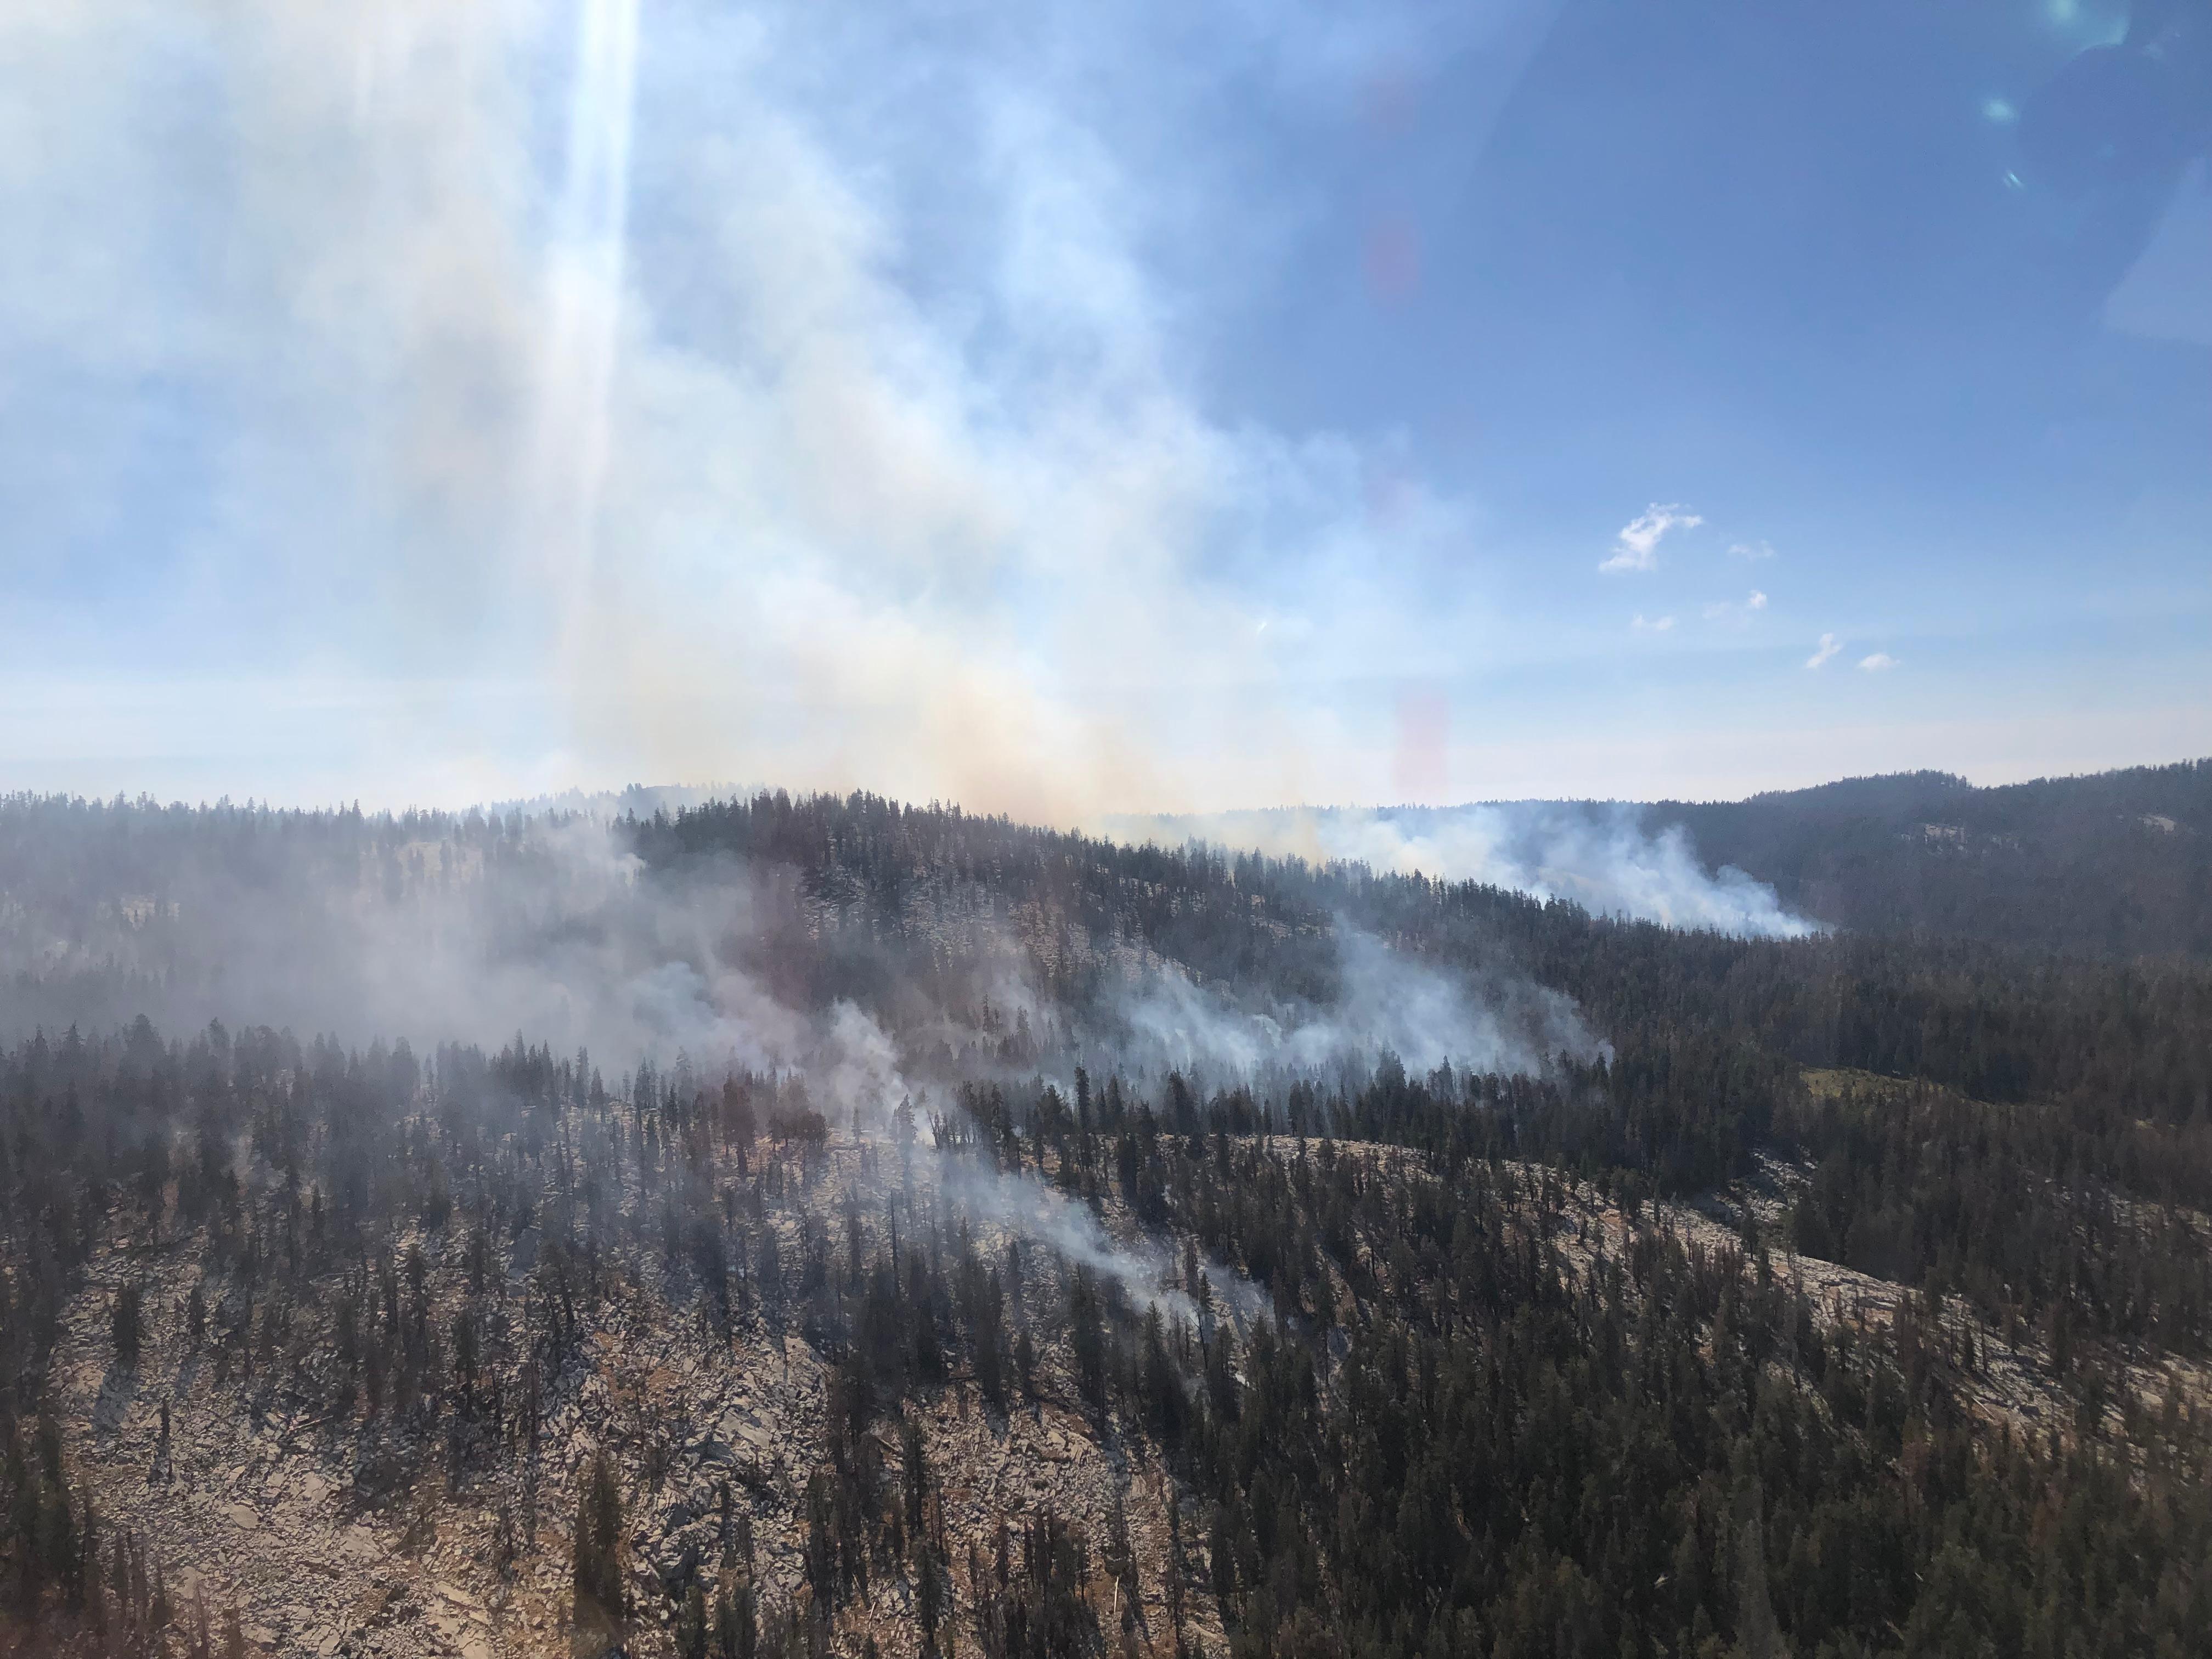 Incident Photo for the Summit Fire